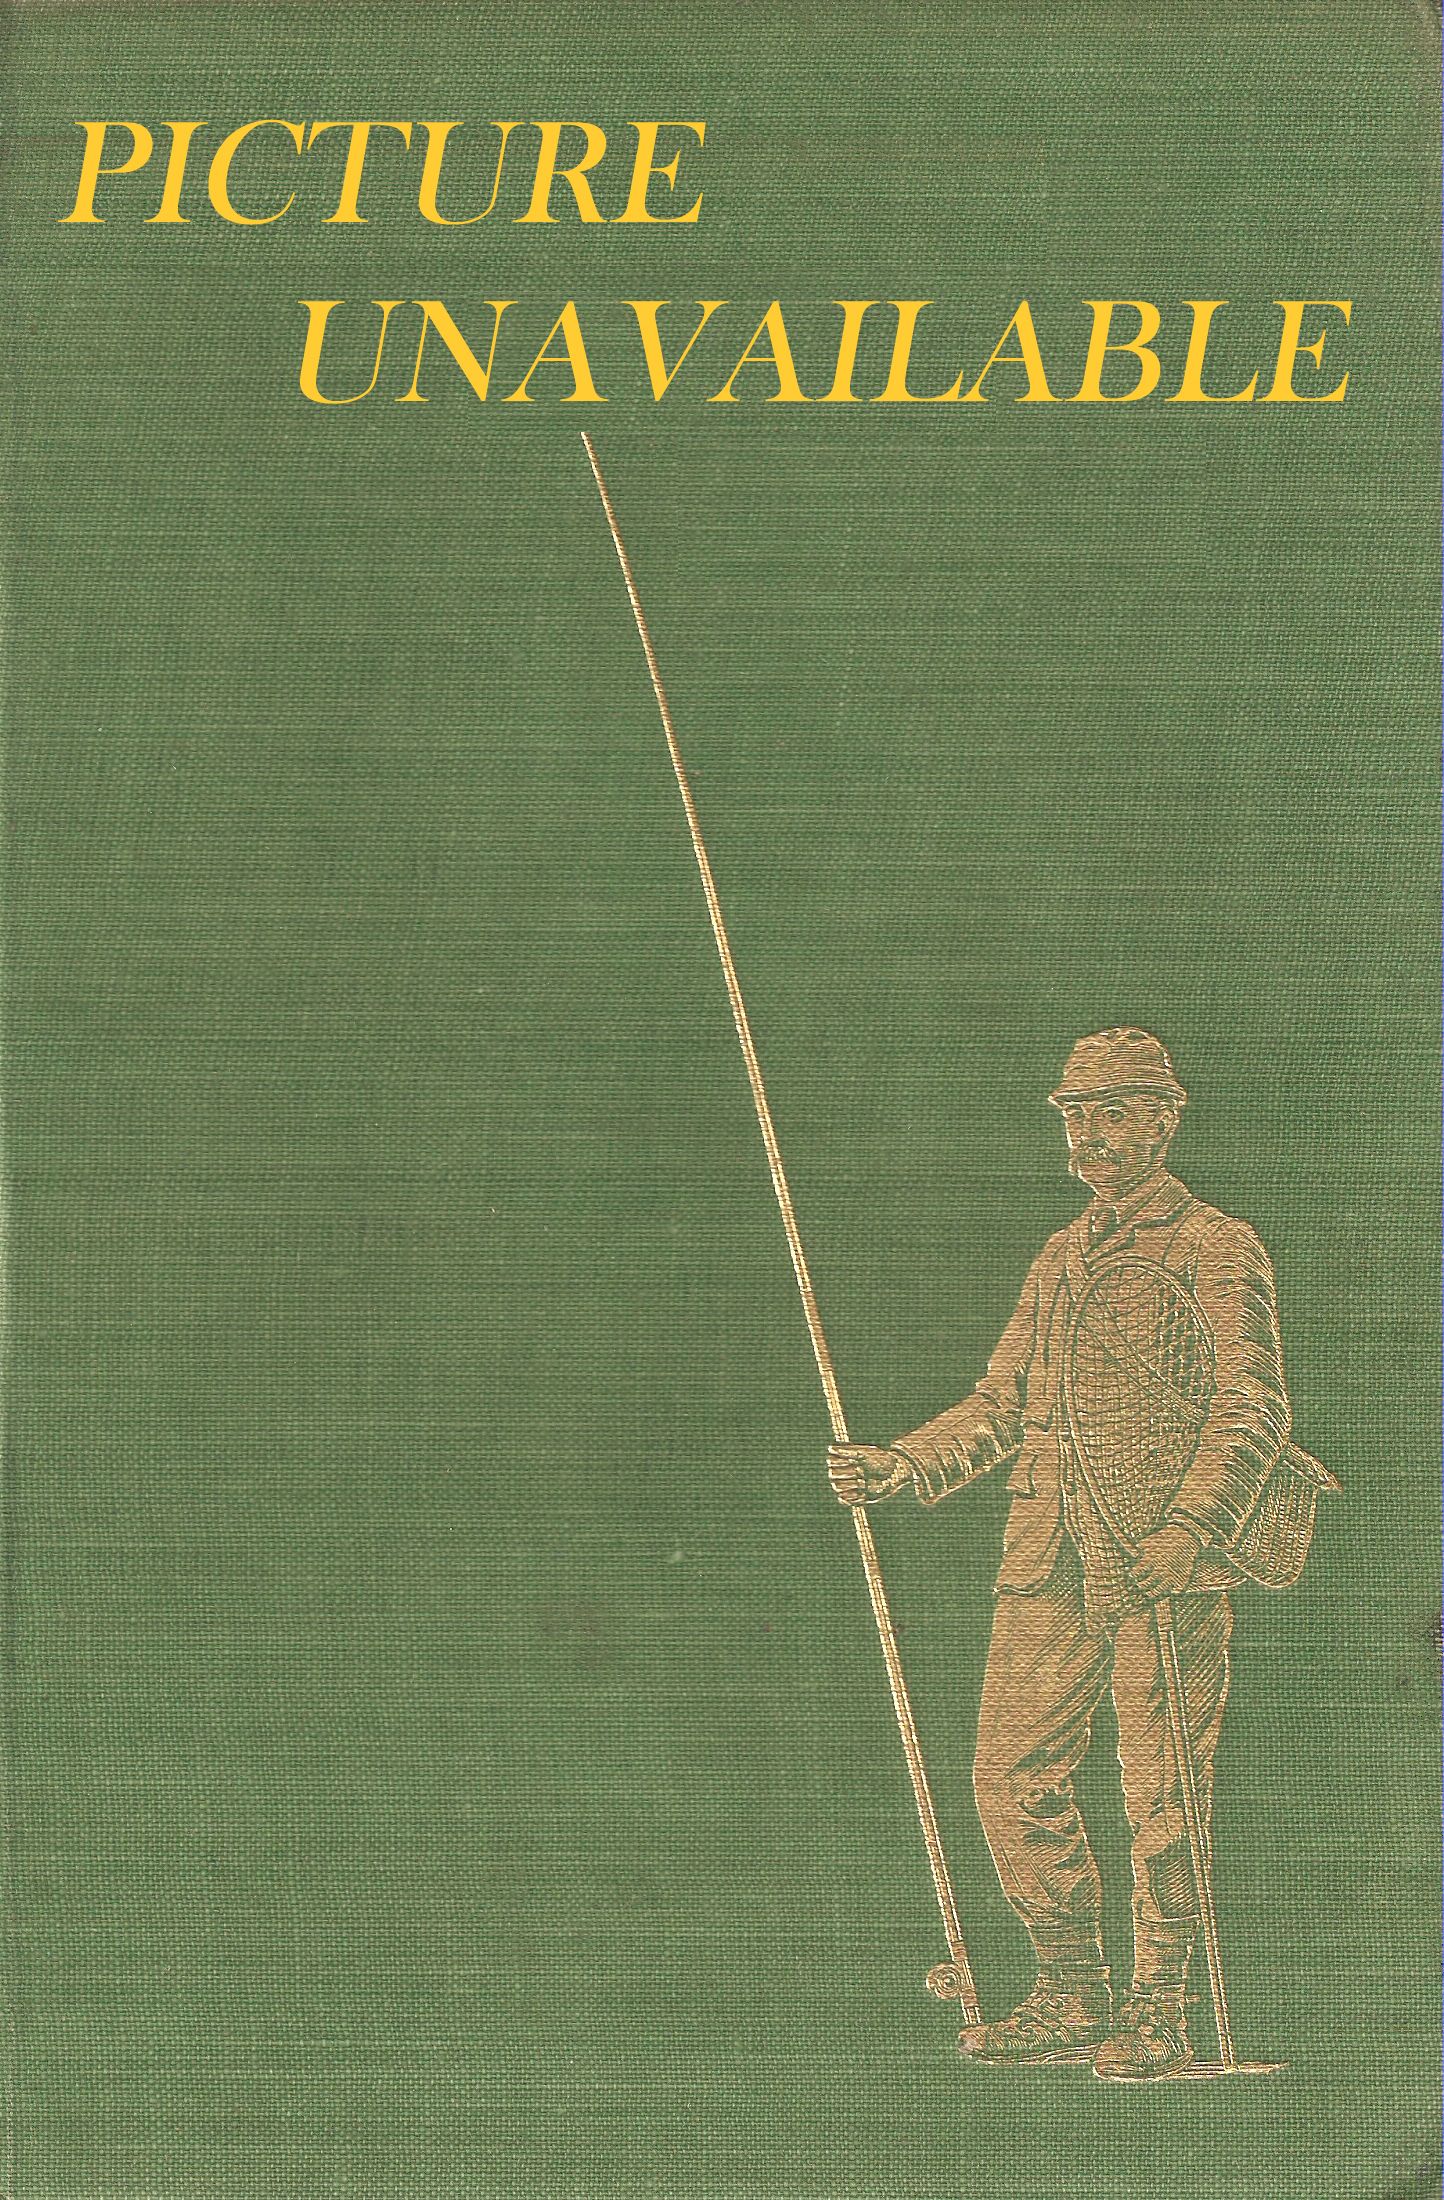 TROUT FISHING. By H.D. Turing. The Sportsman's Library Volume VI.